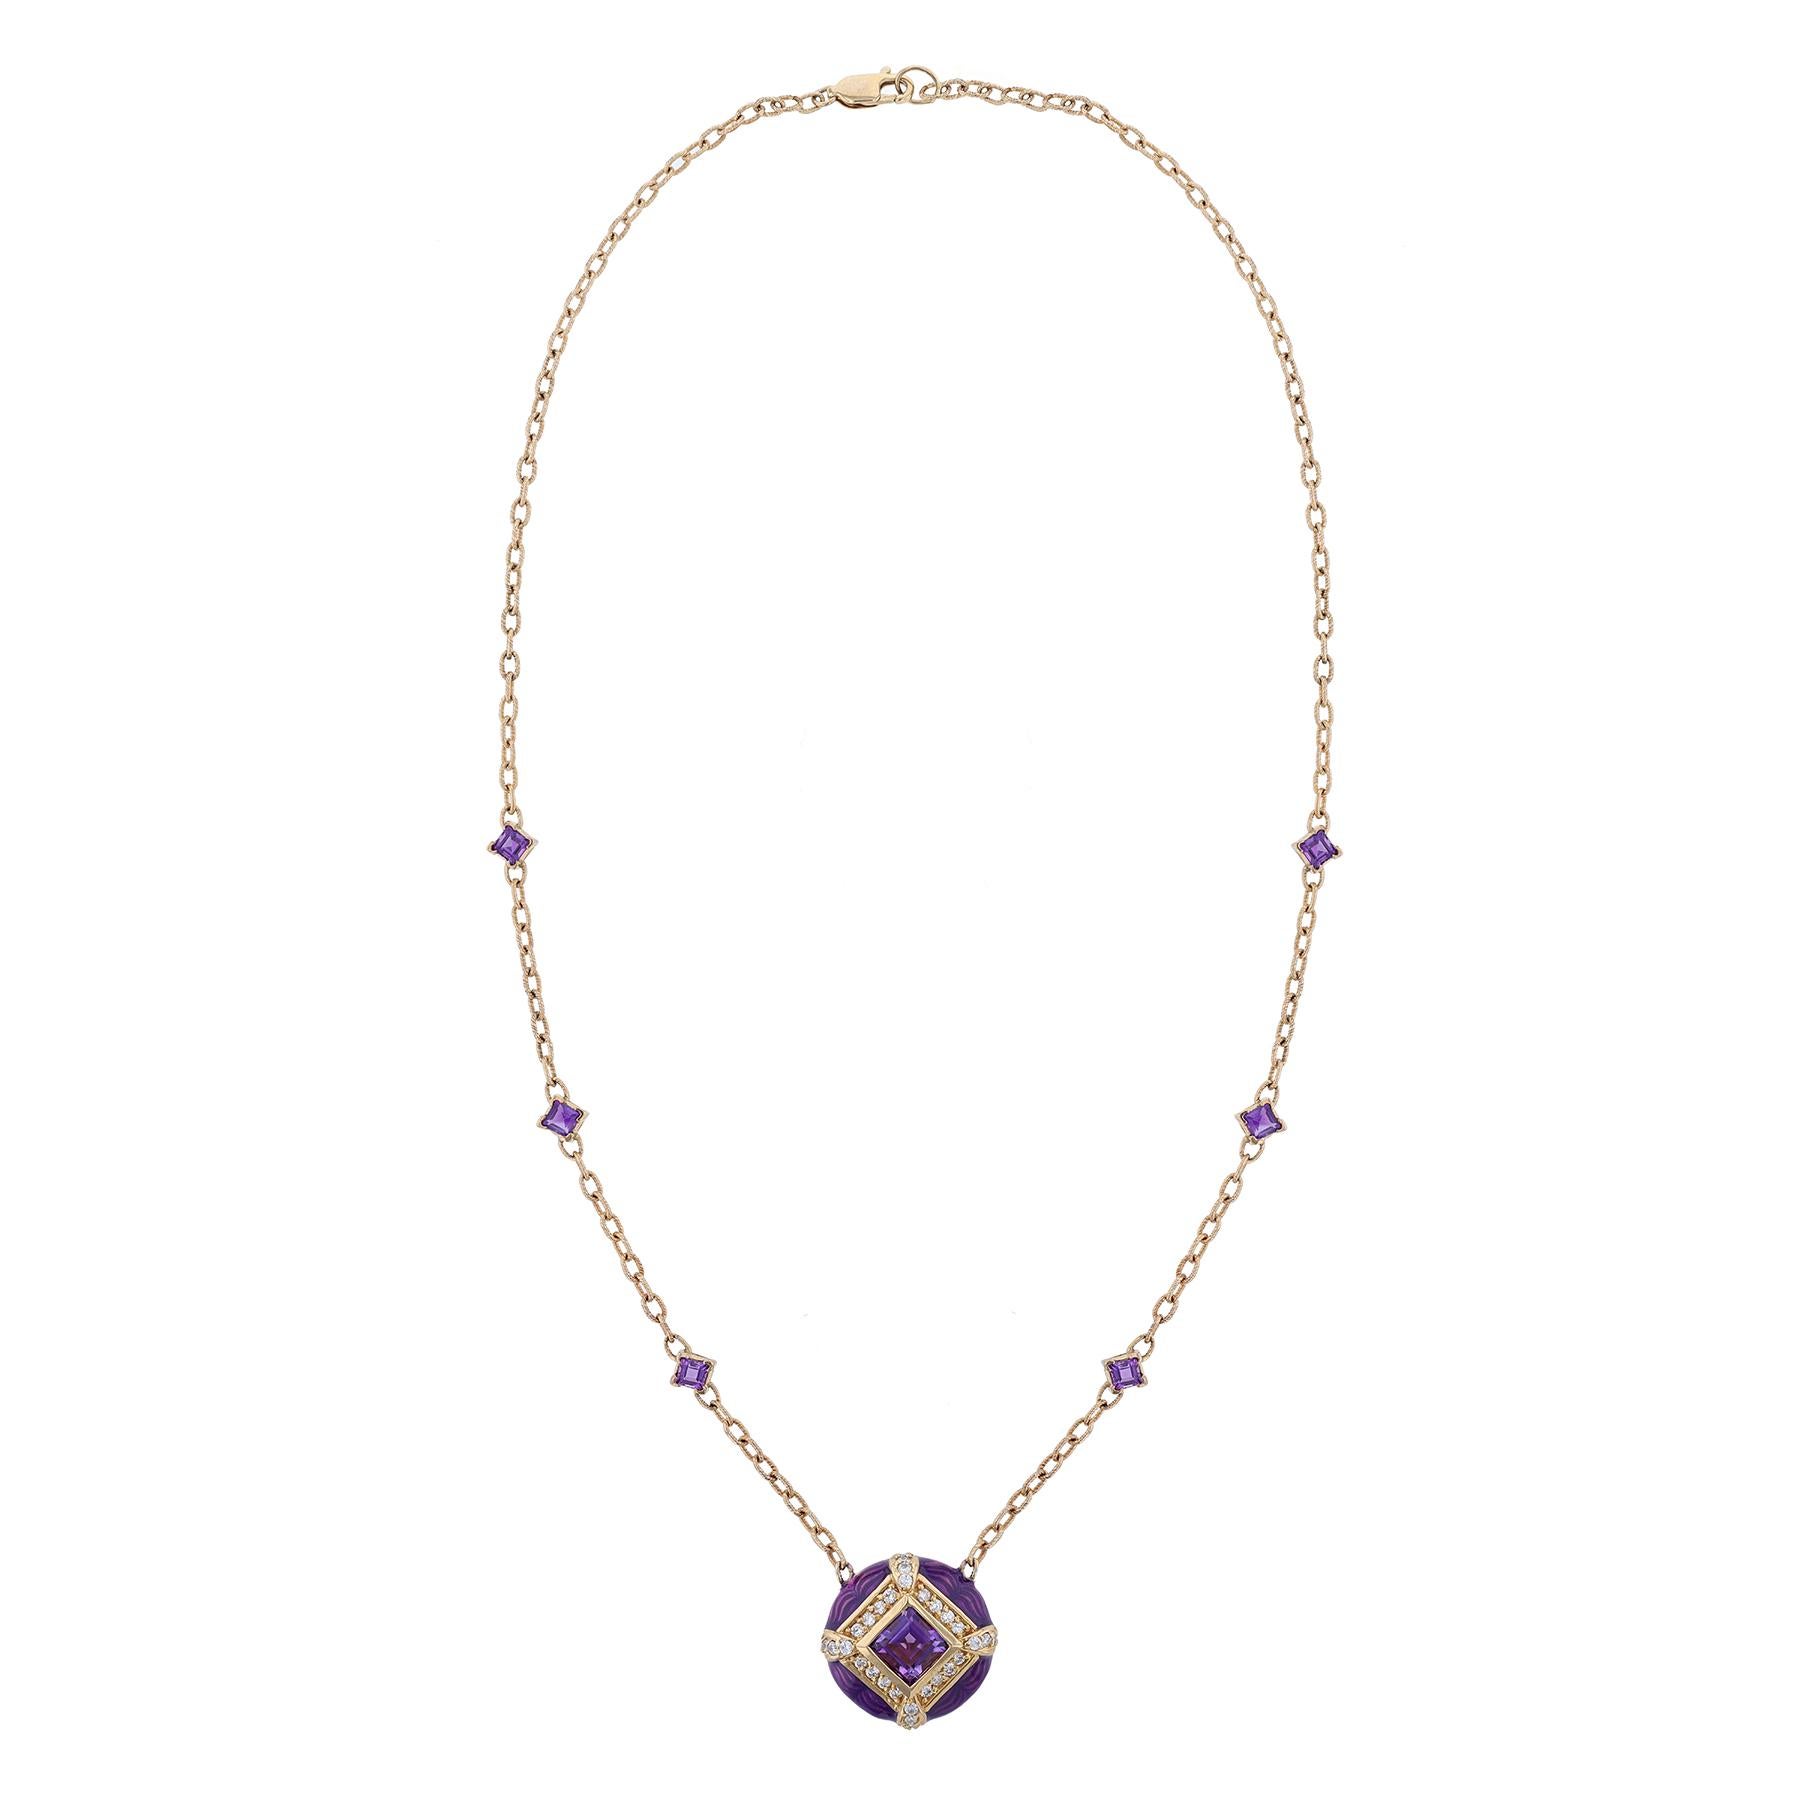 This pendant necklace is made in 14K yellow gold. It features a round enamel pendant with a center princess cut amethyst. Along with 6 amethyst on the chain. The amethyst total carat weight is 2.01 carats and the diamond total carat weight is 0.40